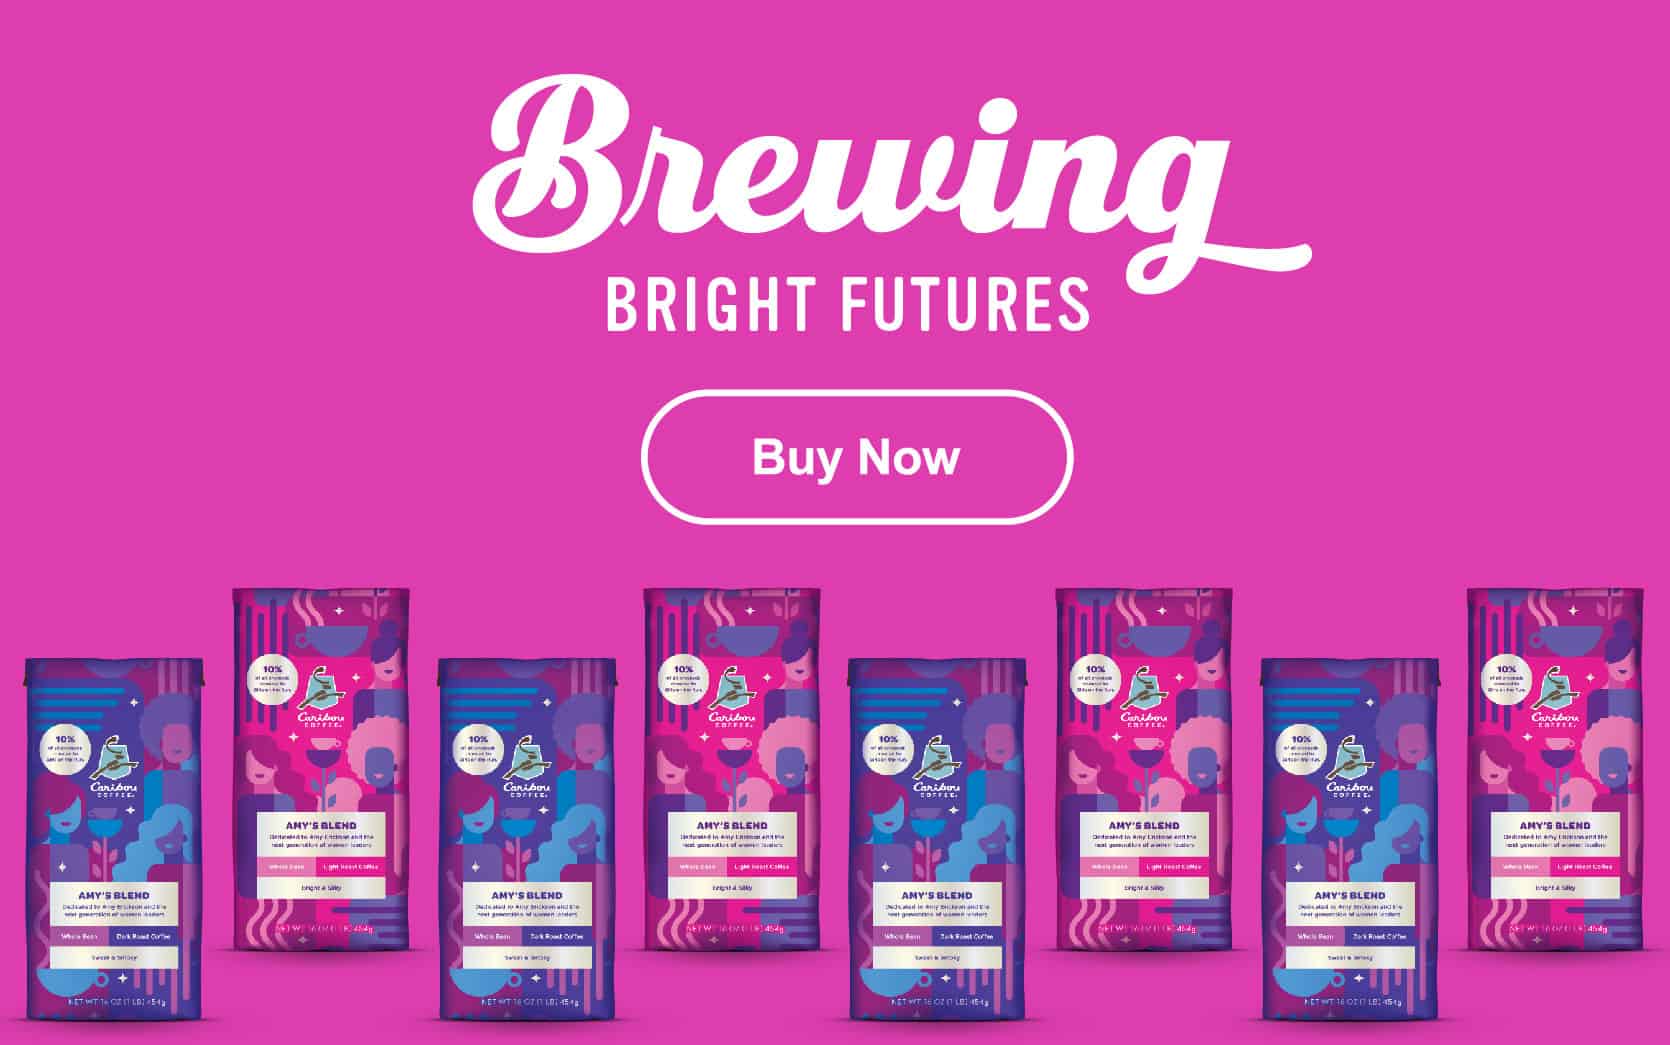 Brewing Bright Futures. Buy a bag of Amy's Blend now